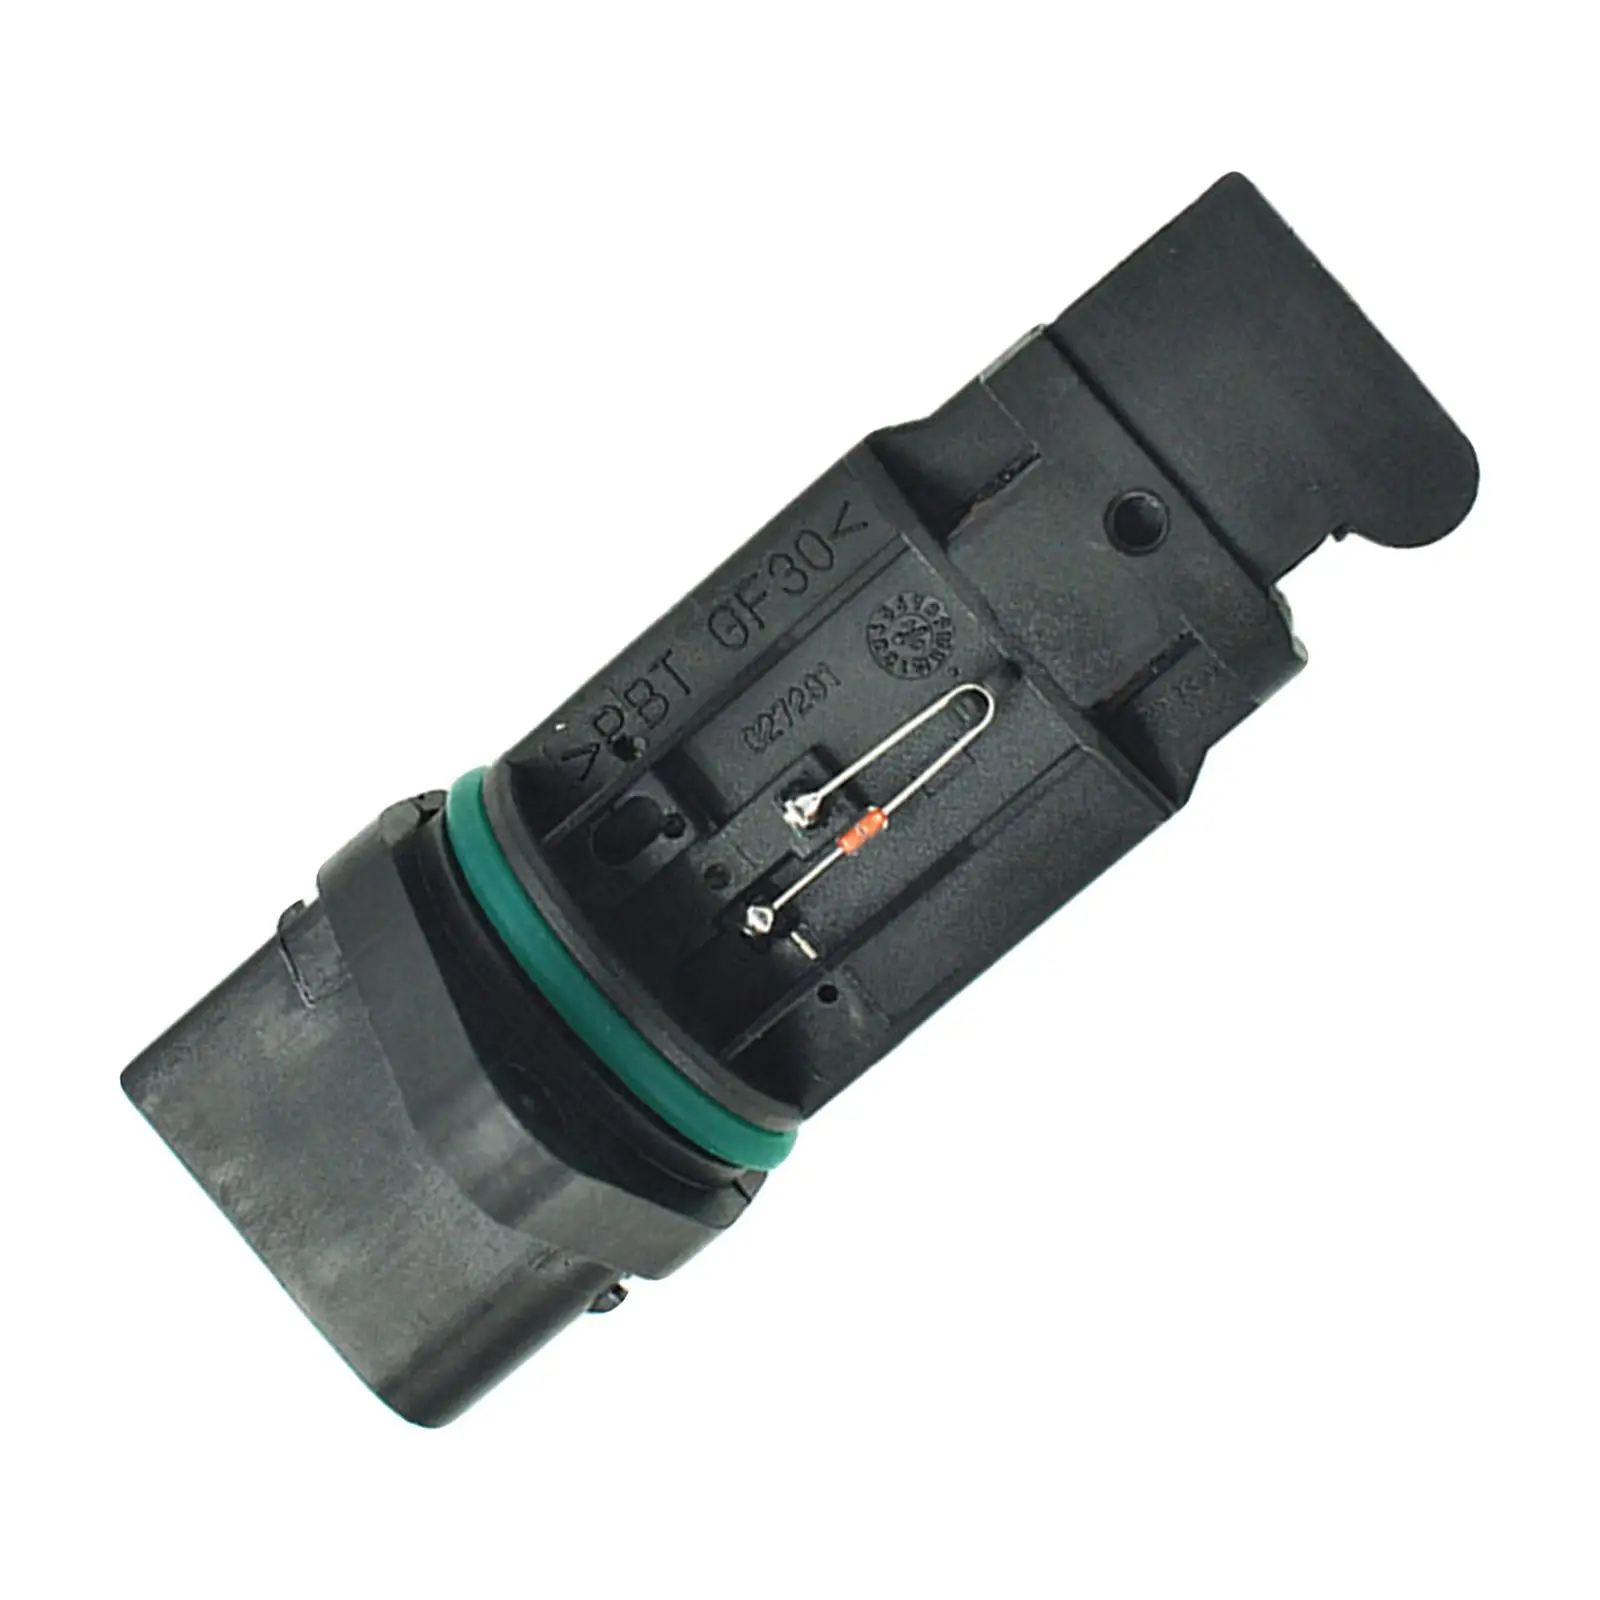   Maf Sensor Meter Black Assembly Fit for 911 3.4 97-2001 0280217007 99660612300 Stable Characteristics